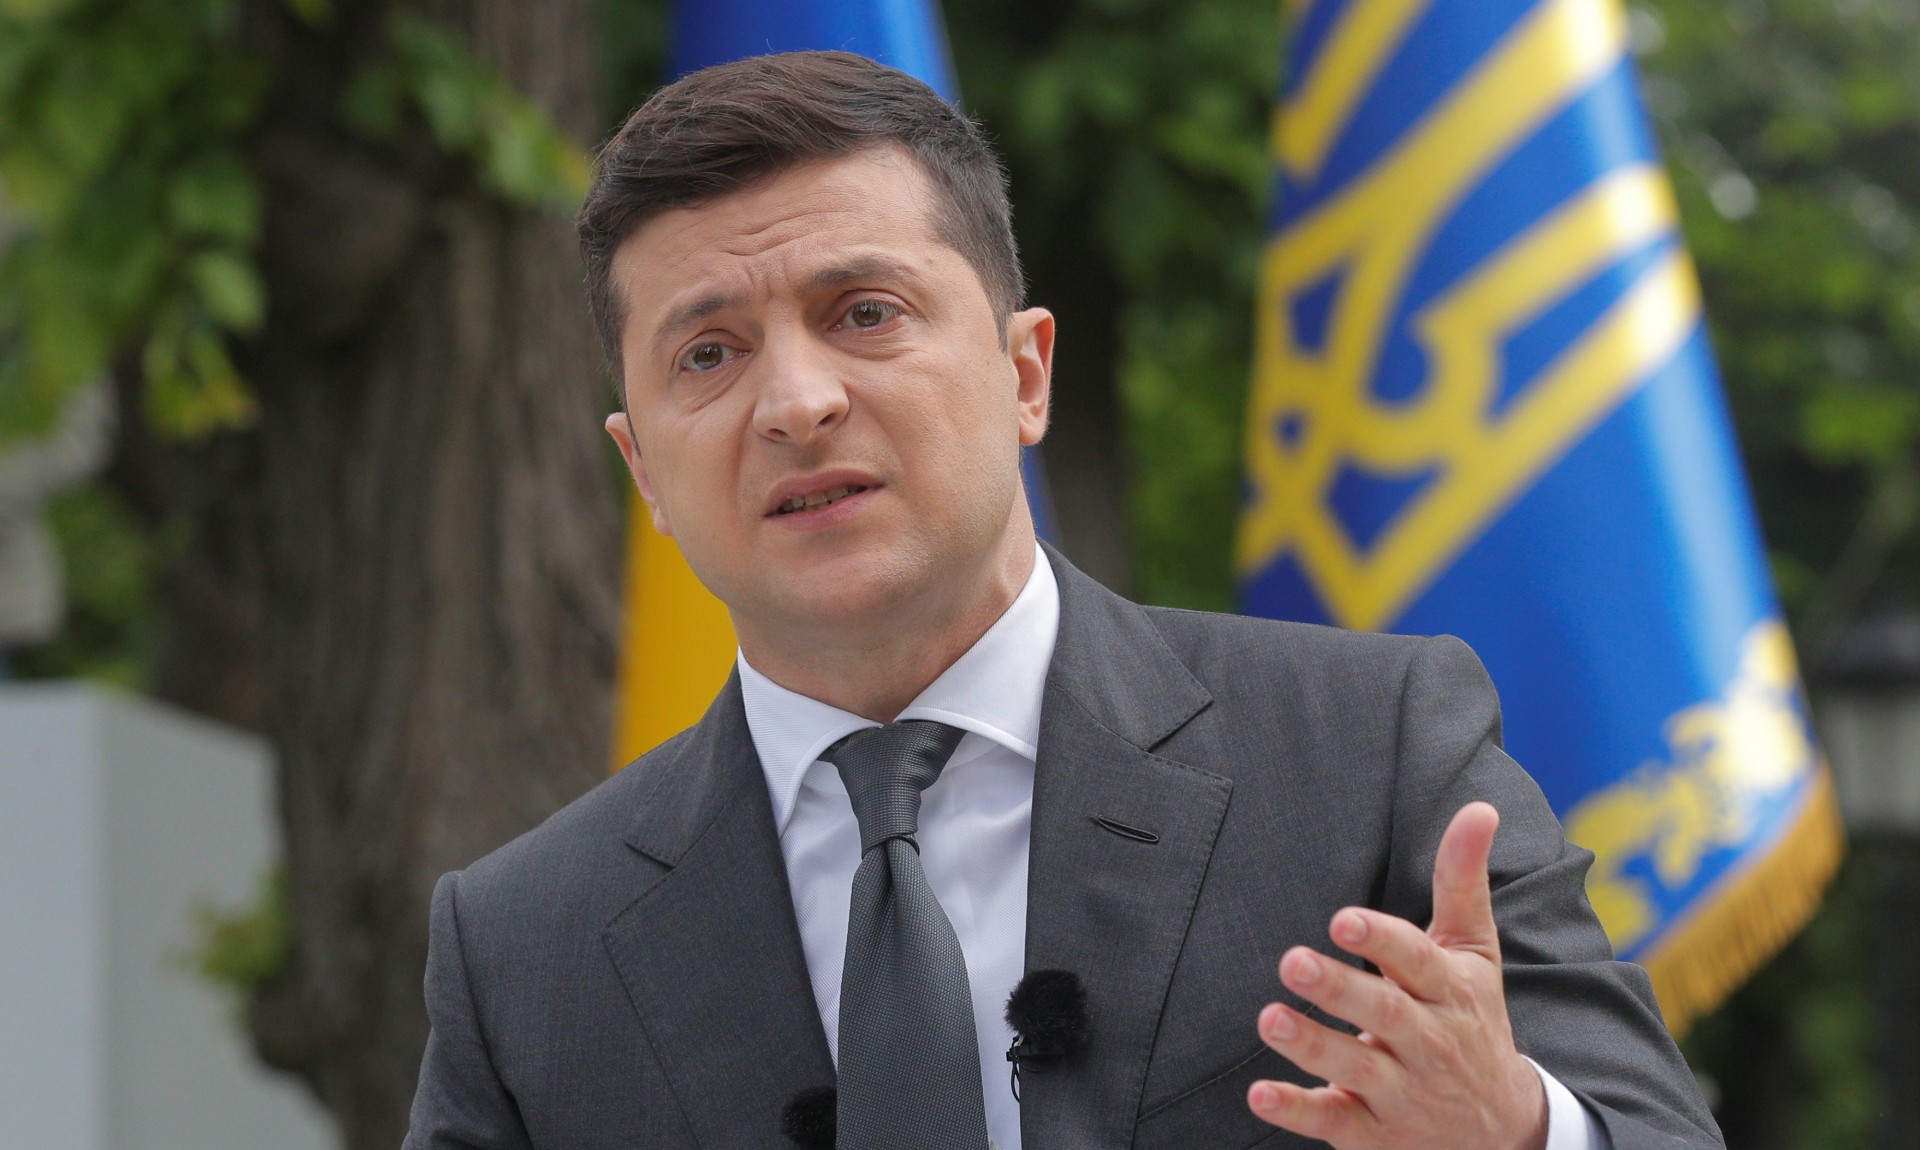 Ukraine President Says Kyiv Staying out of US Internal Politics, Elections